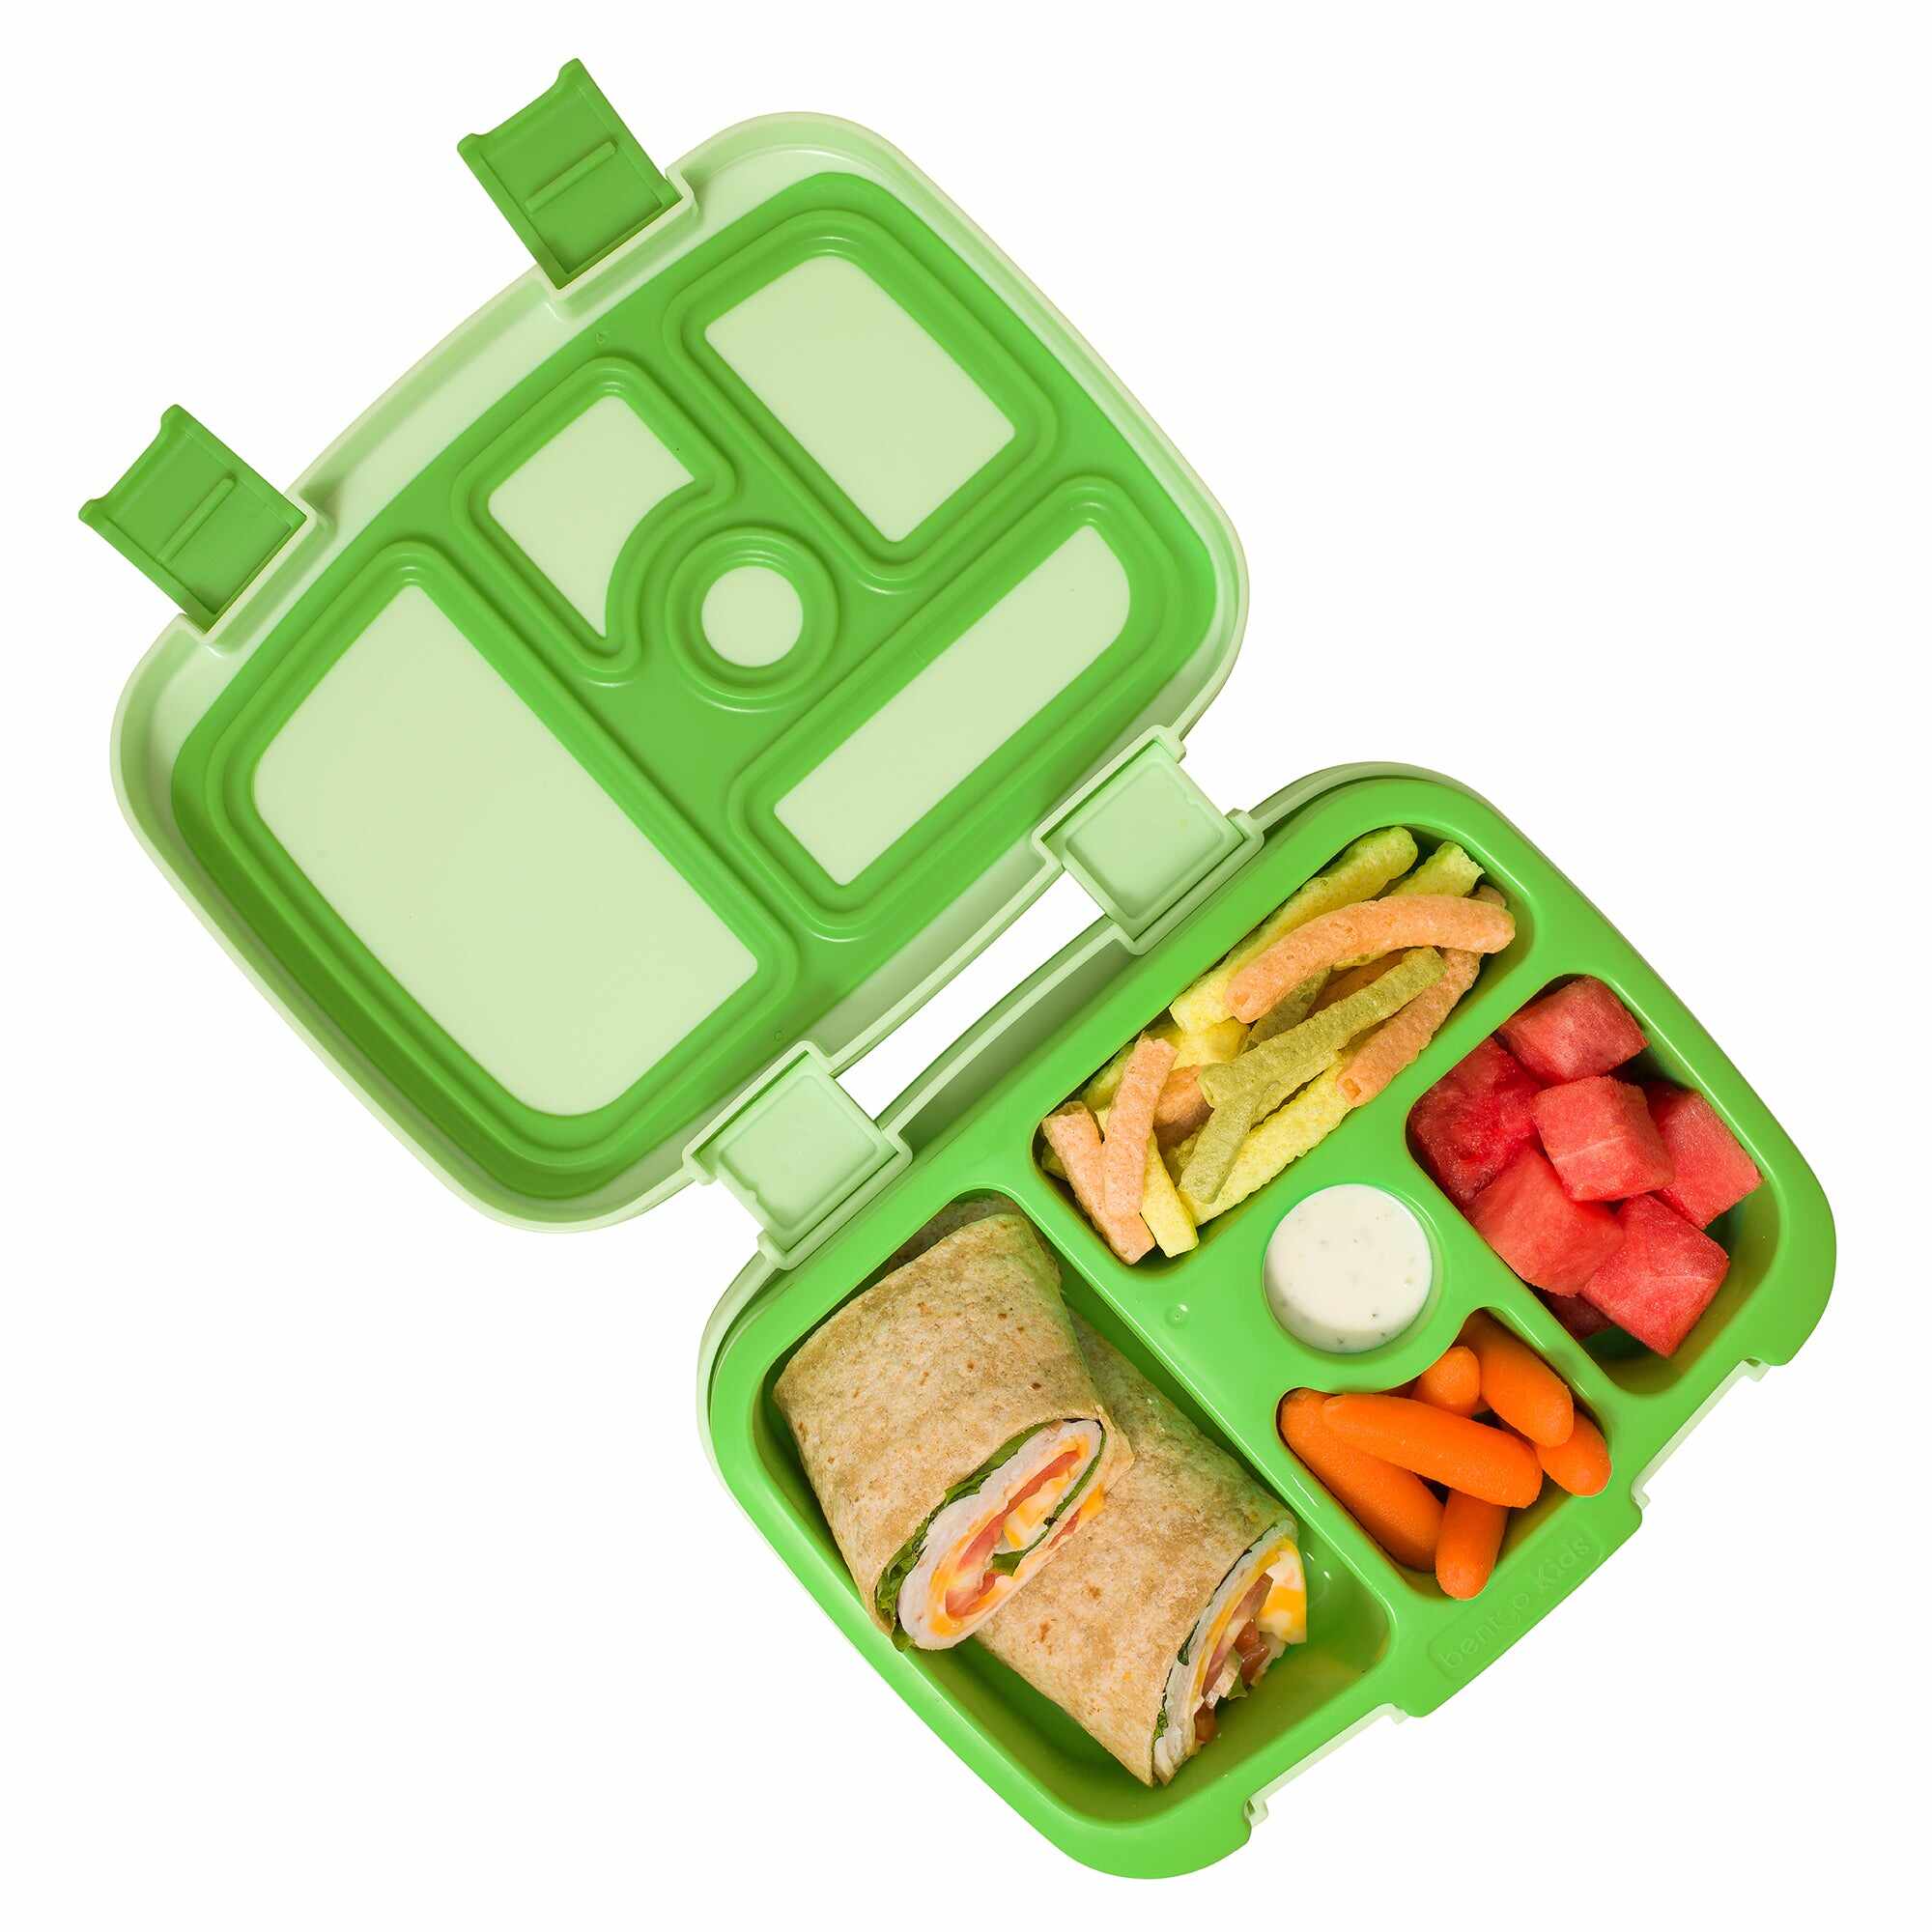 Kids Lunch Box (3-Pack)